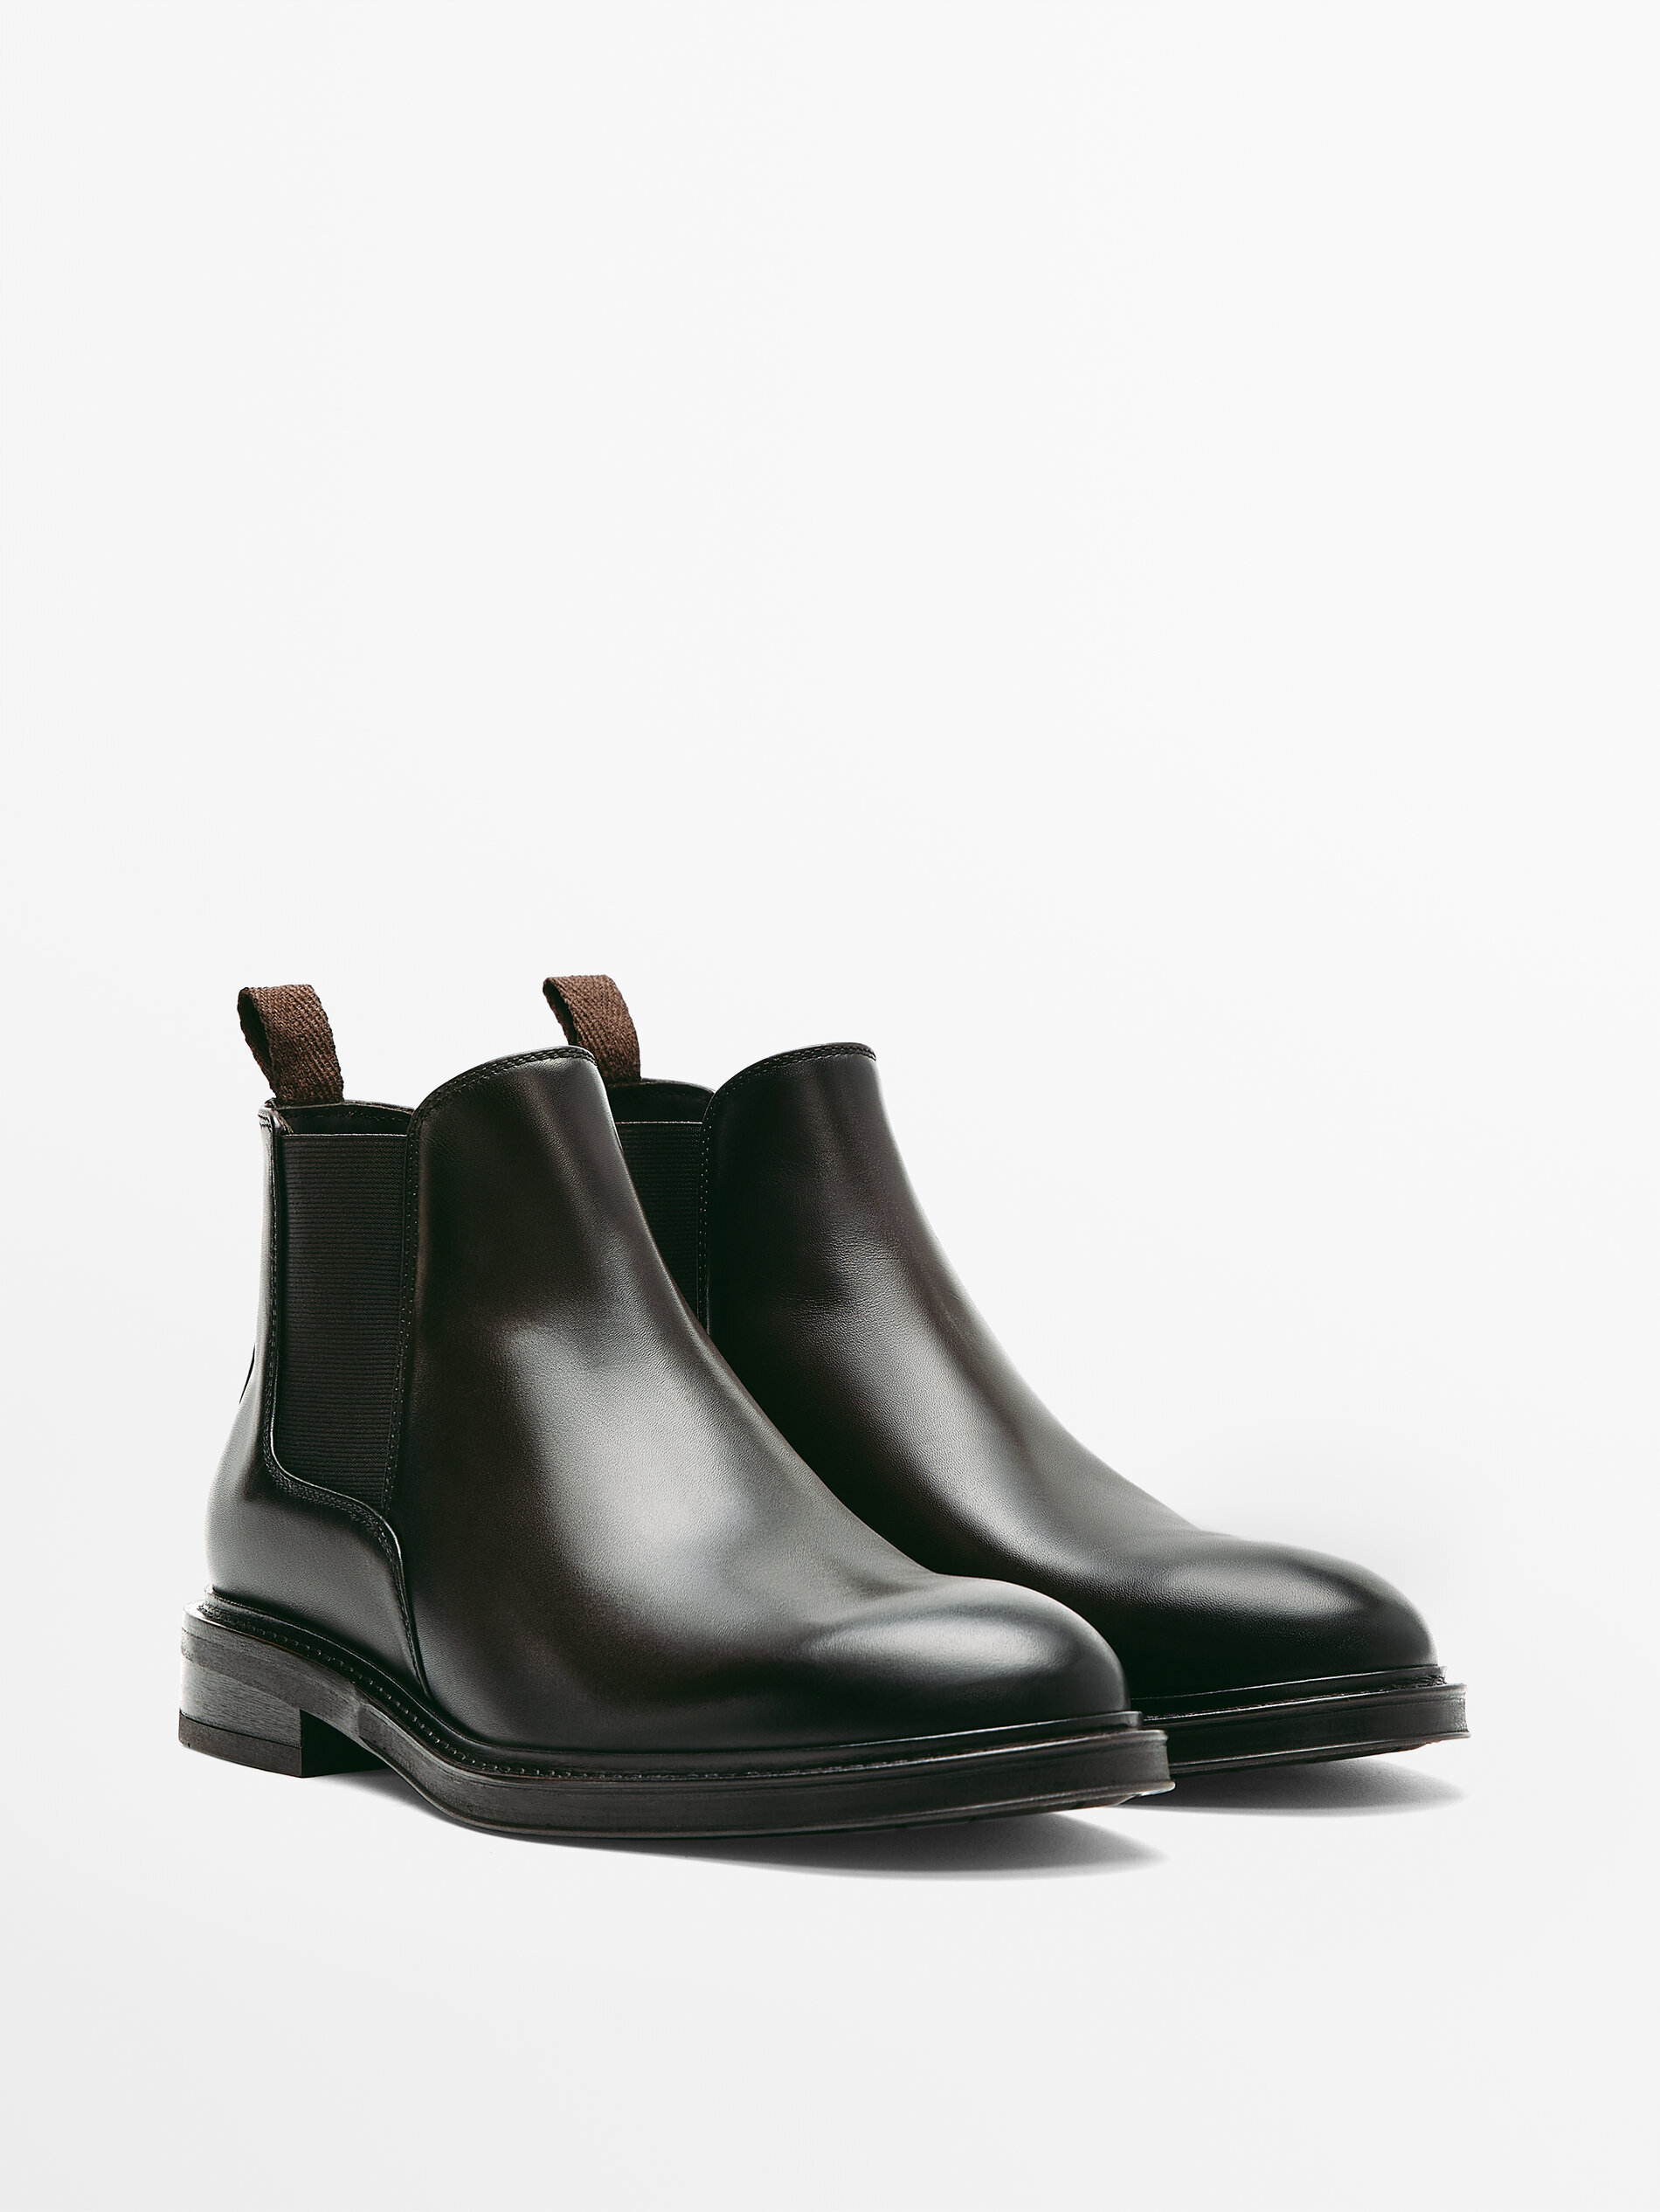 Massimo Dutti - BROWN BRUSHED LEATHER CHELSEA BOOTS